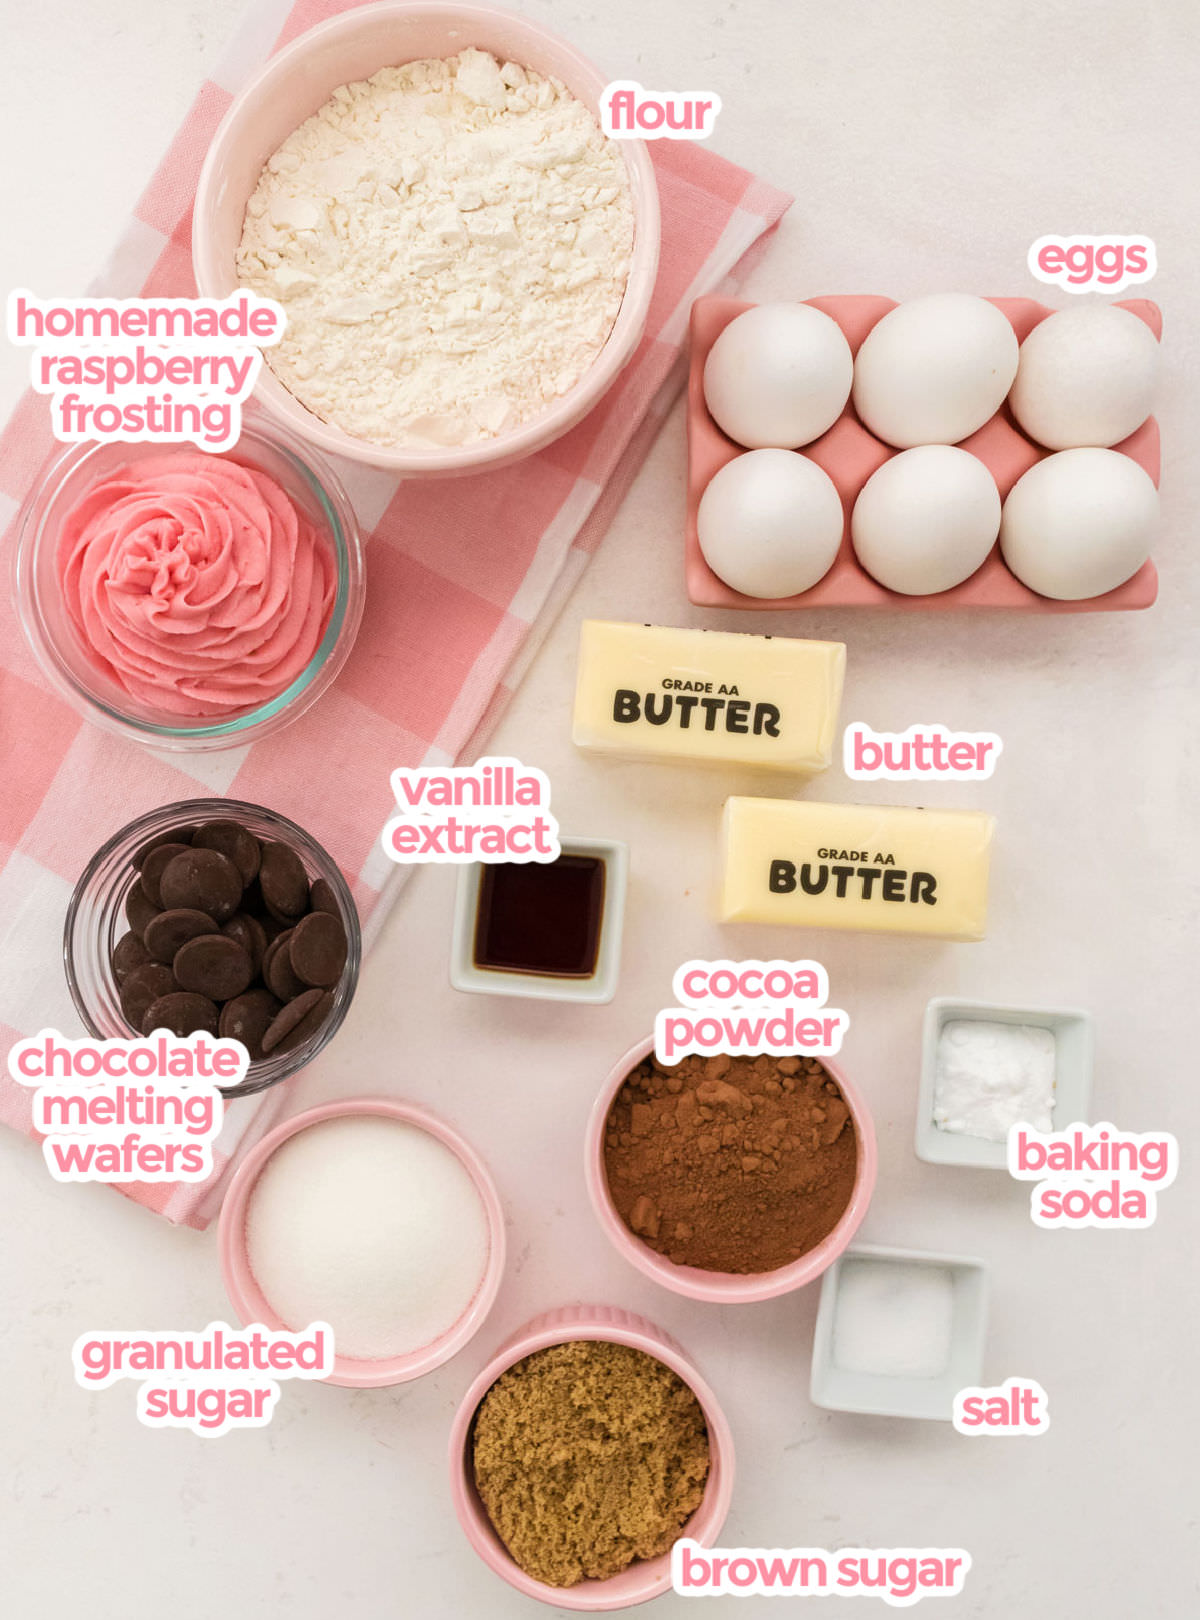 All the ingredients you will need to make Chocolate Cookies including Flour, Eggs, Raspberry Frosting,  Butter, Vanilla, Chocolate Wafers, Cocoa Powder, Granulated Sugar and Brown Sugar.